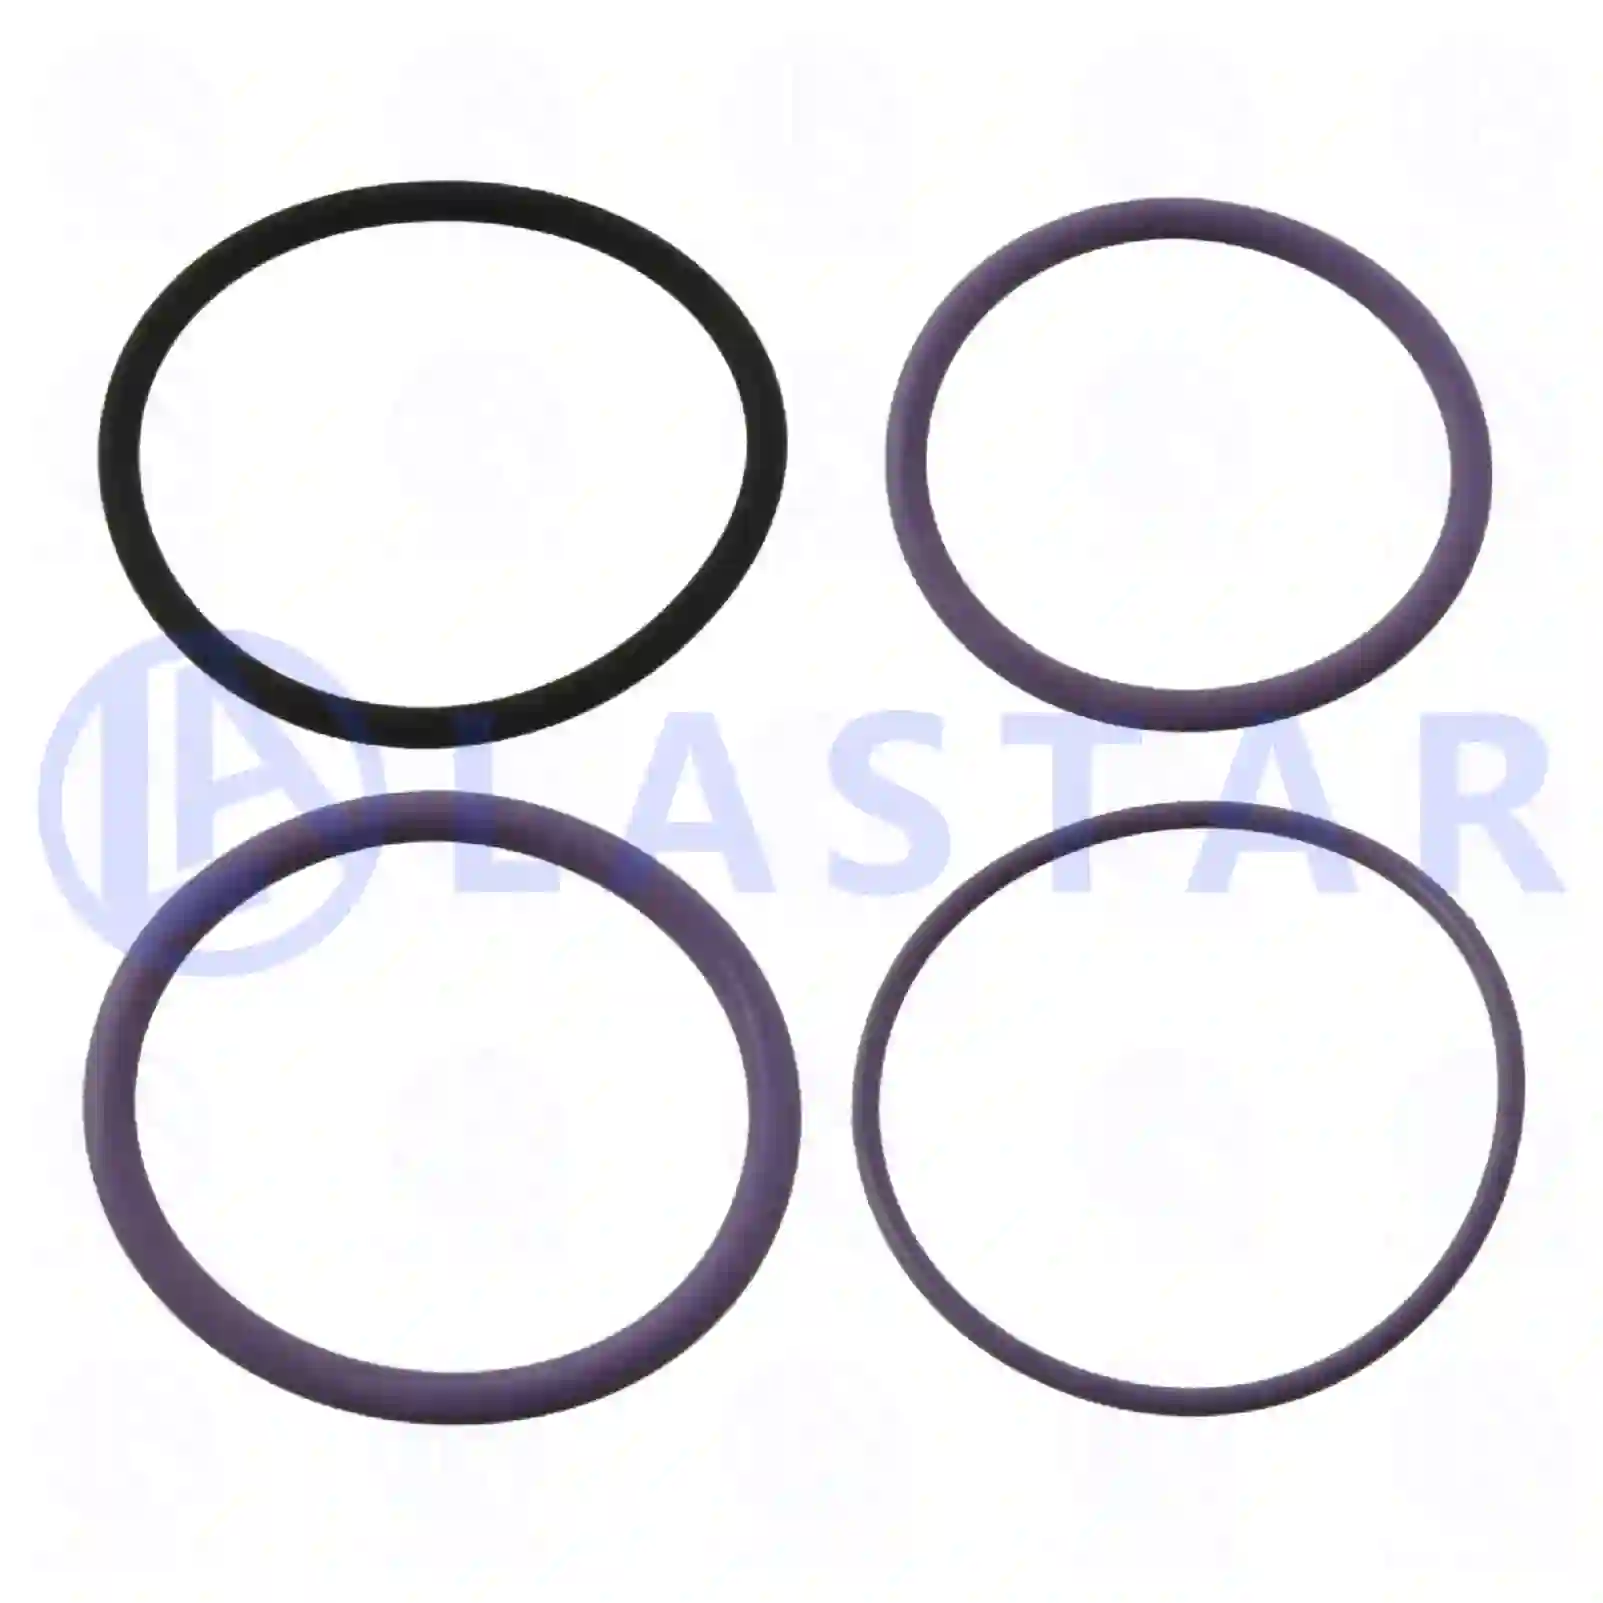  O-ring kit || Lastar Spare Part | Truck Spare Parts, Auotomotive Spare Parts